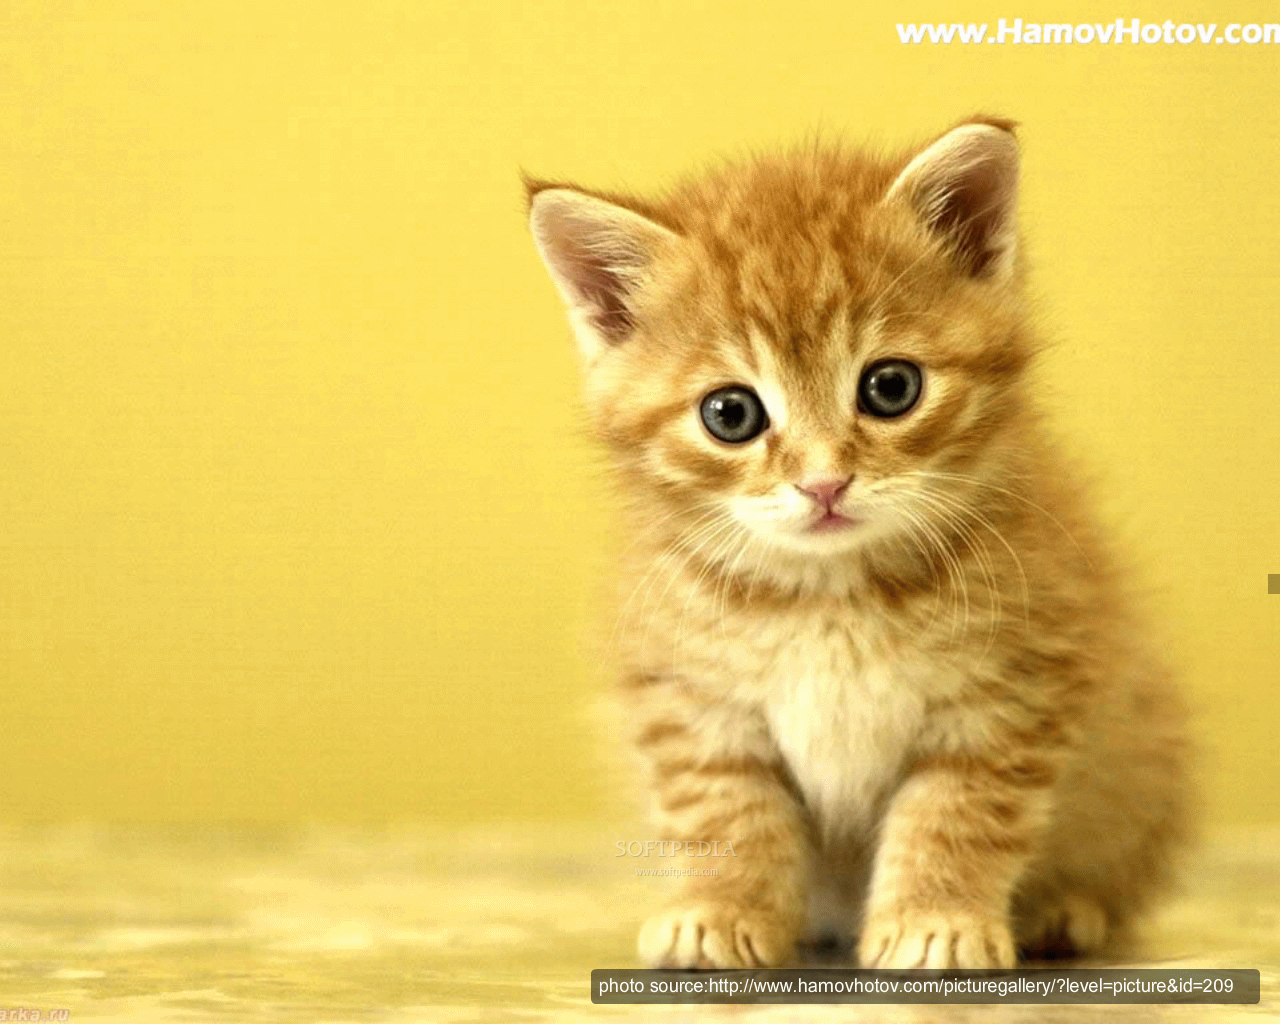 Is A Sample Of What Kitten Screensaver Will Display On Your Desktop